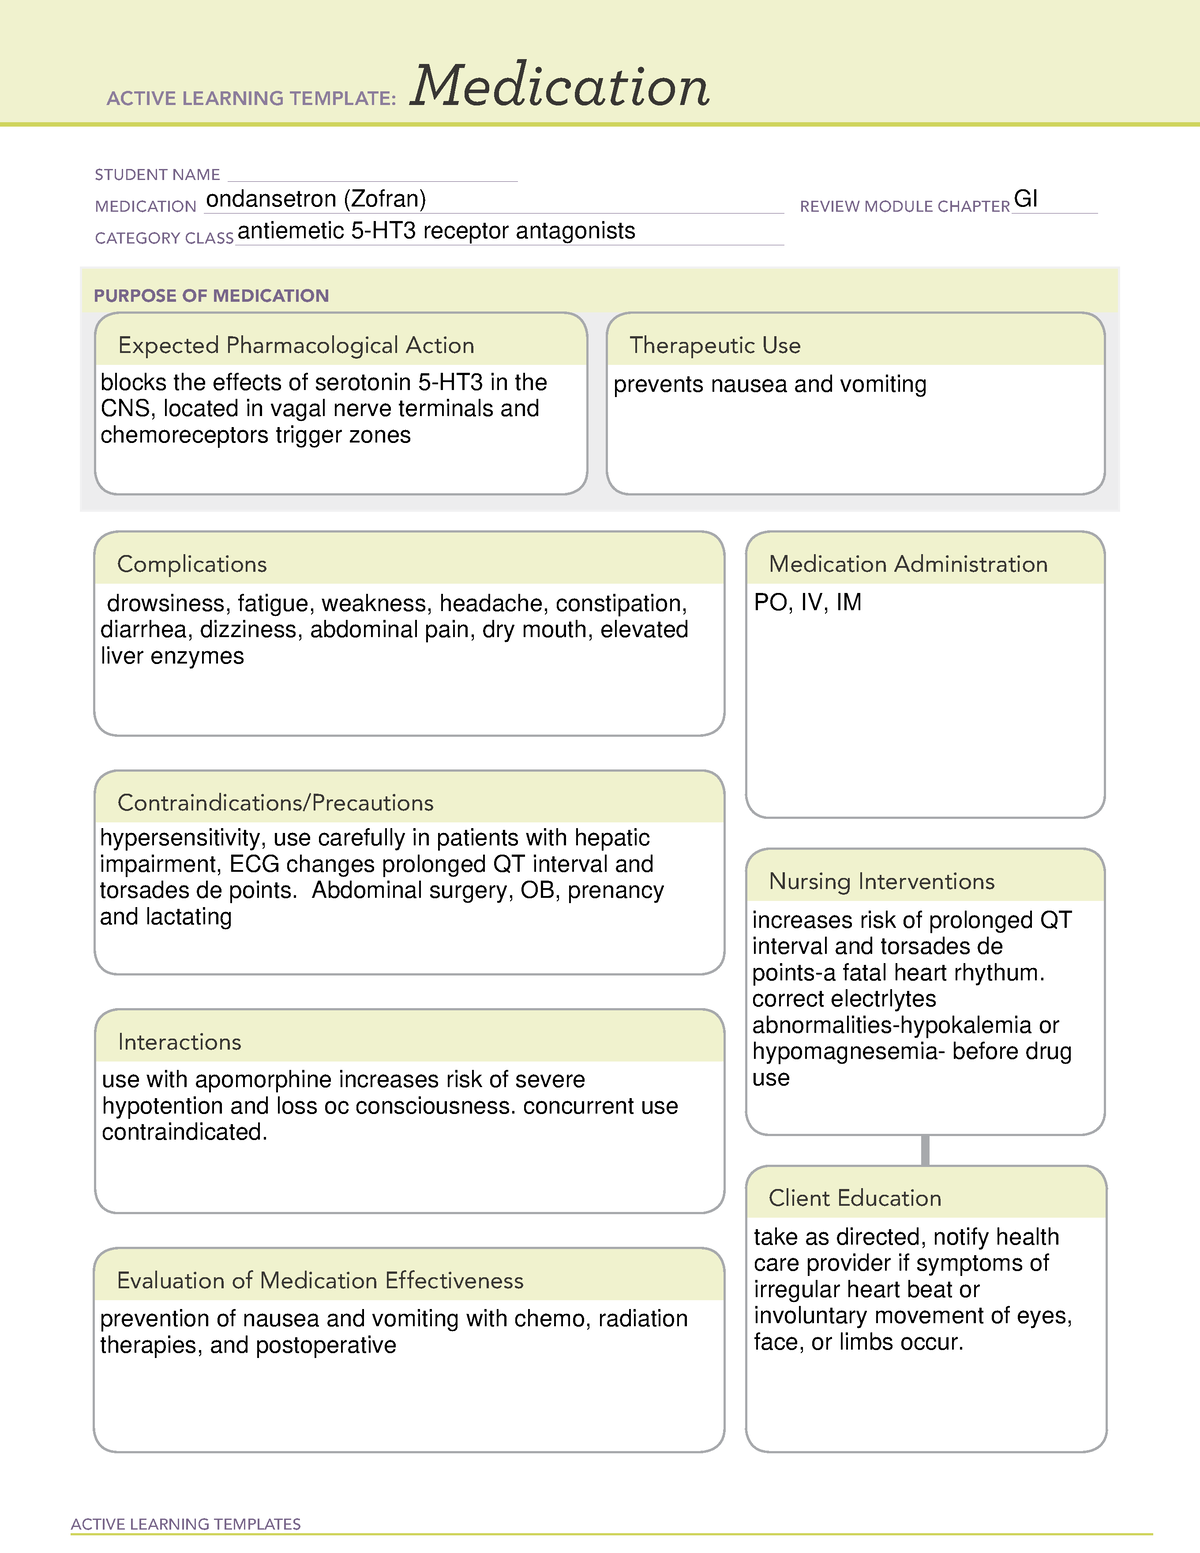 Ondansetron Medication template with mechanism of action, assessment